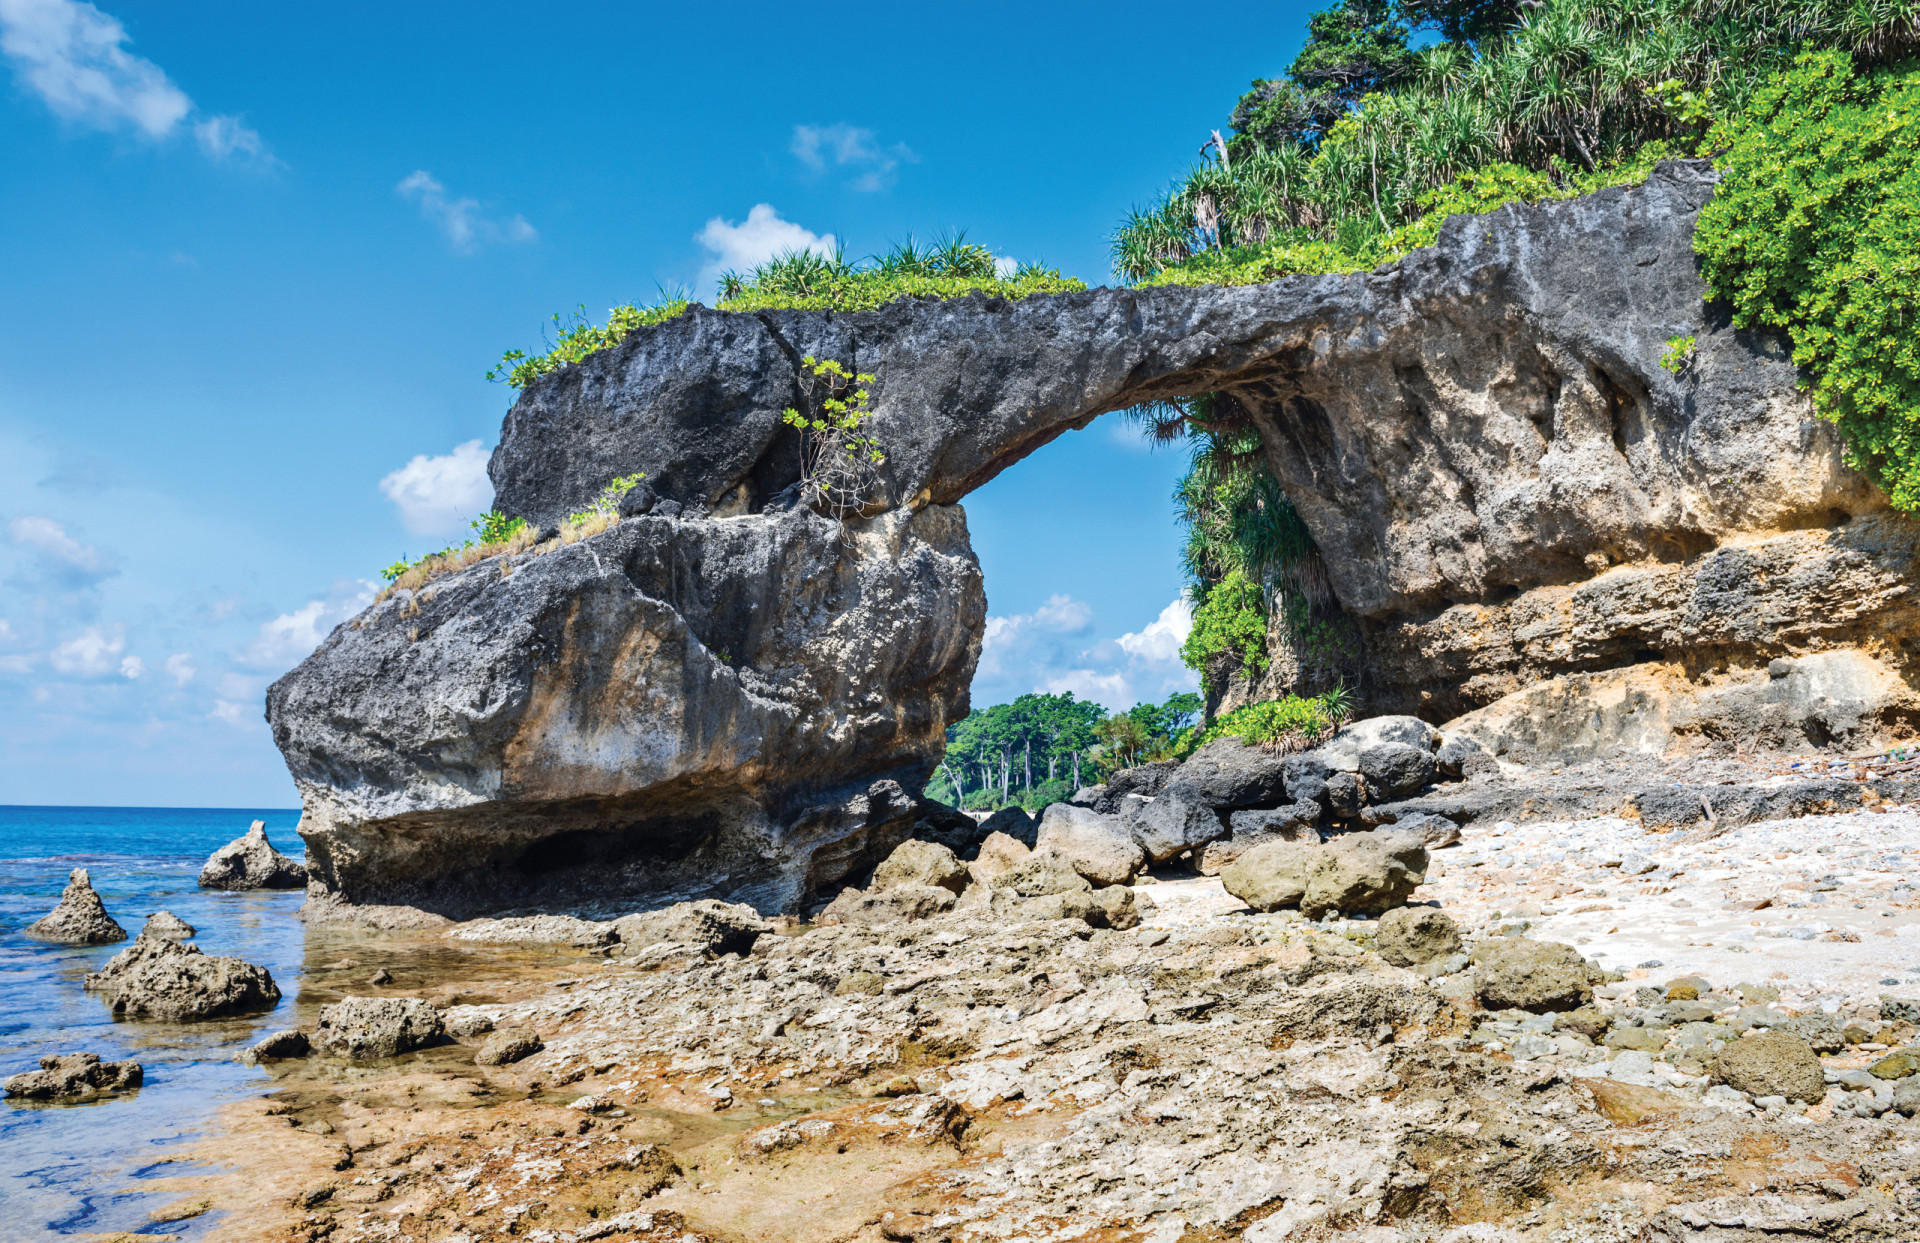 <p>Shaheed Dweep, previously known as Neil Island, is one of a cluster of small islands in Ritchie's Archipelago. The island is a low-key vacation destination easily explored by bicycle (it's that compact). The Hawrah Natural Bridge is a much photographed local landmark.</p><p>You may also like:<a href="https://www.starsinsider.com/n/447193?utm_source=msn.com&utm_medium=display&utm_campaign=referral_description&utm_content=689154en-my"> Hilarious celebrity tweets about parenting that are just too real </a></p>